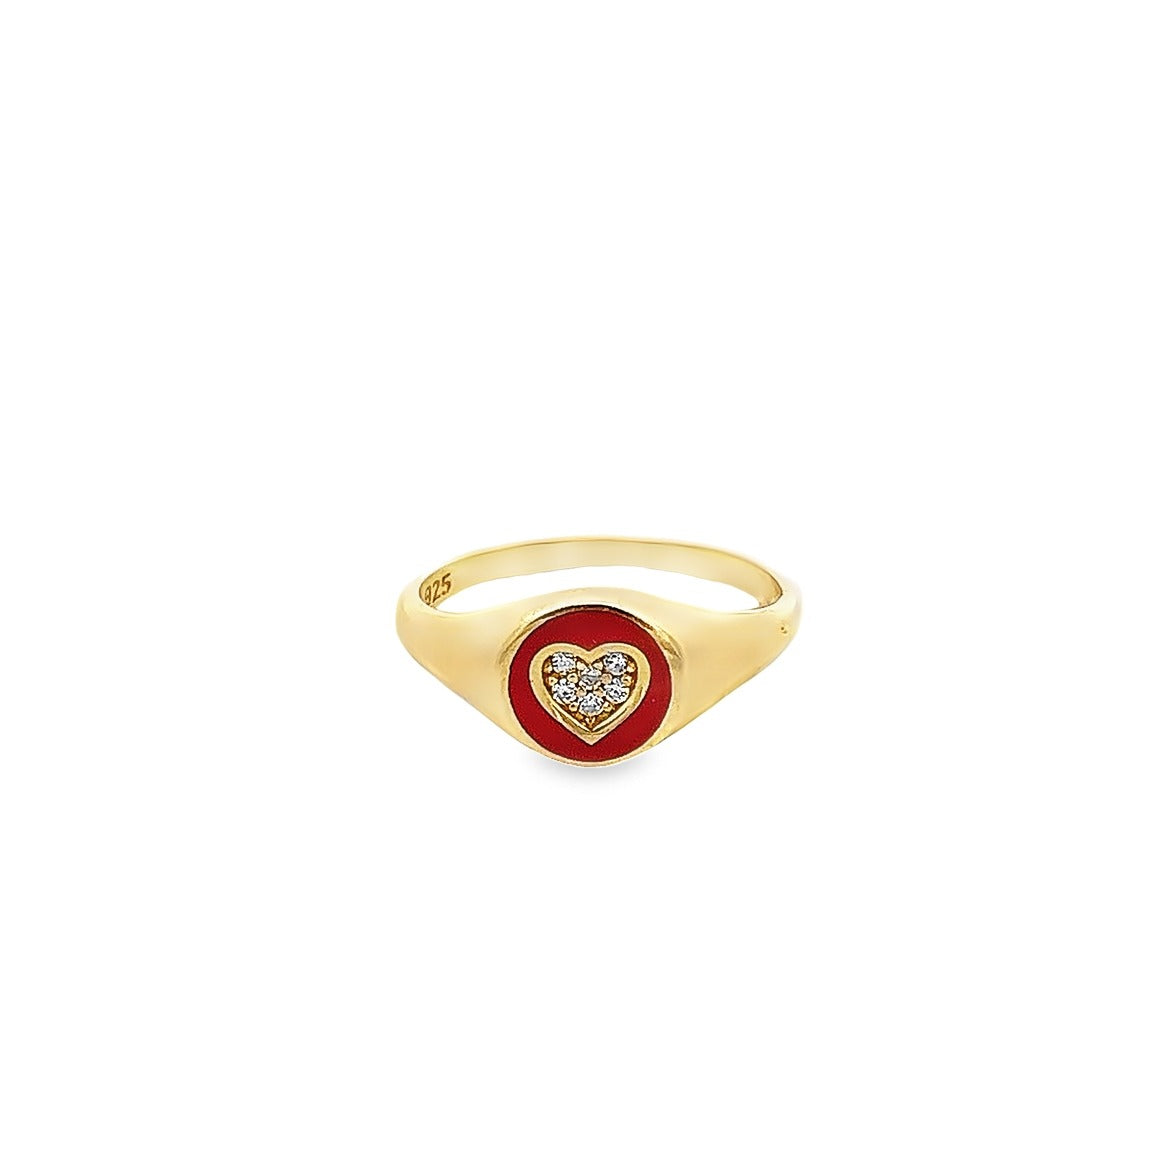 925 GOLD PLATED HEART RING WITH RED ENAMEL AND CRYSTALS